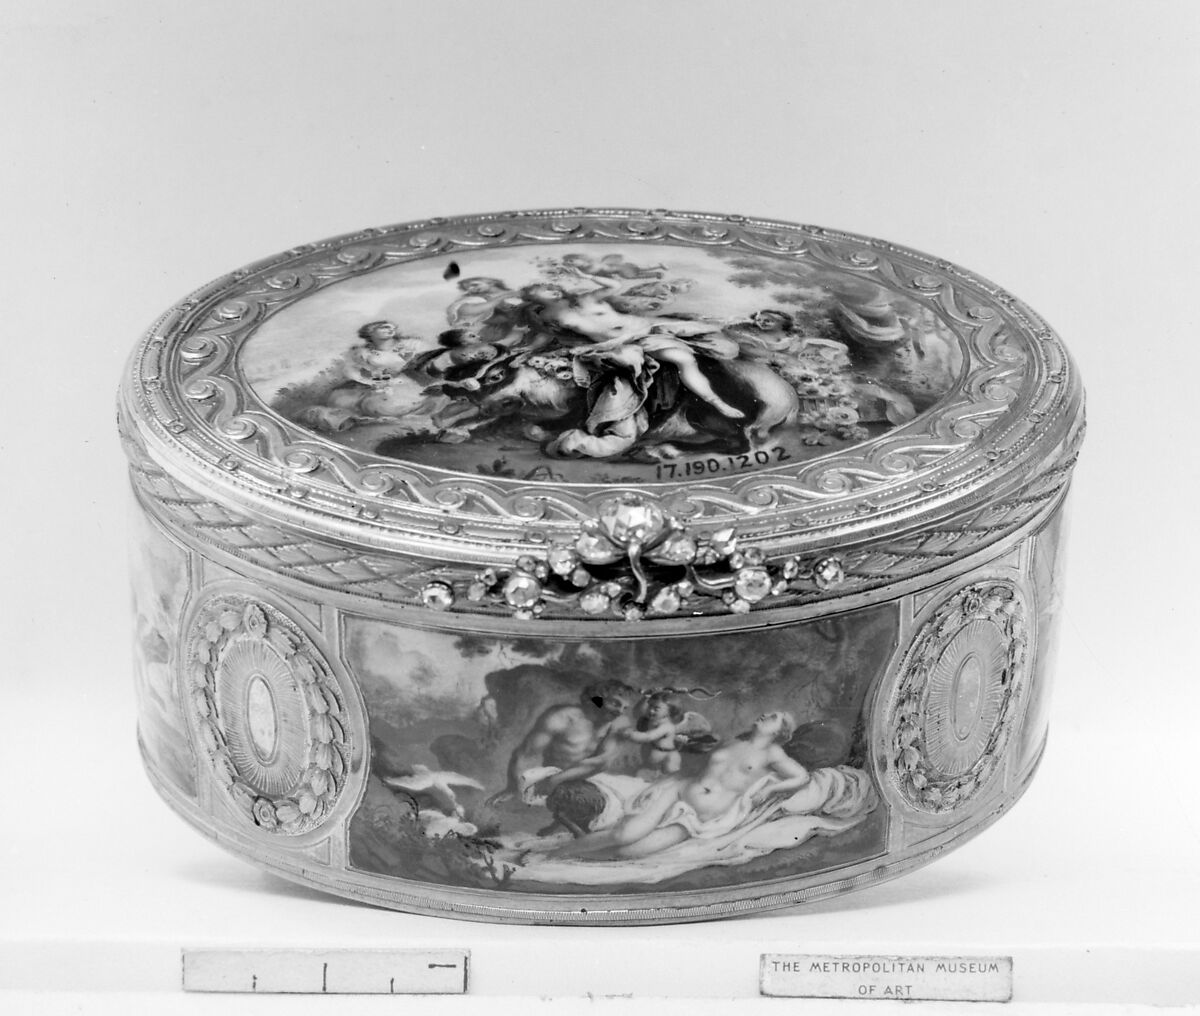 Snuffbox with mythological scenes, Gold, enamel, diamonds, French or German 